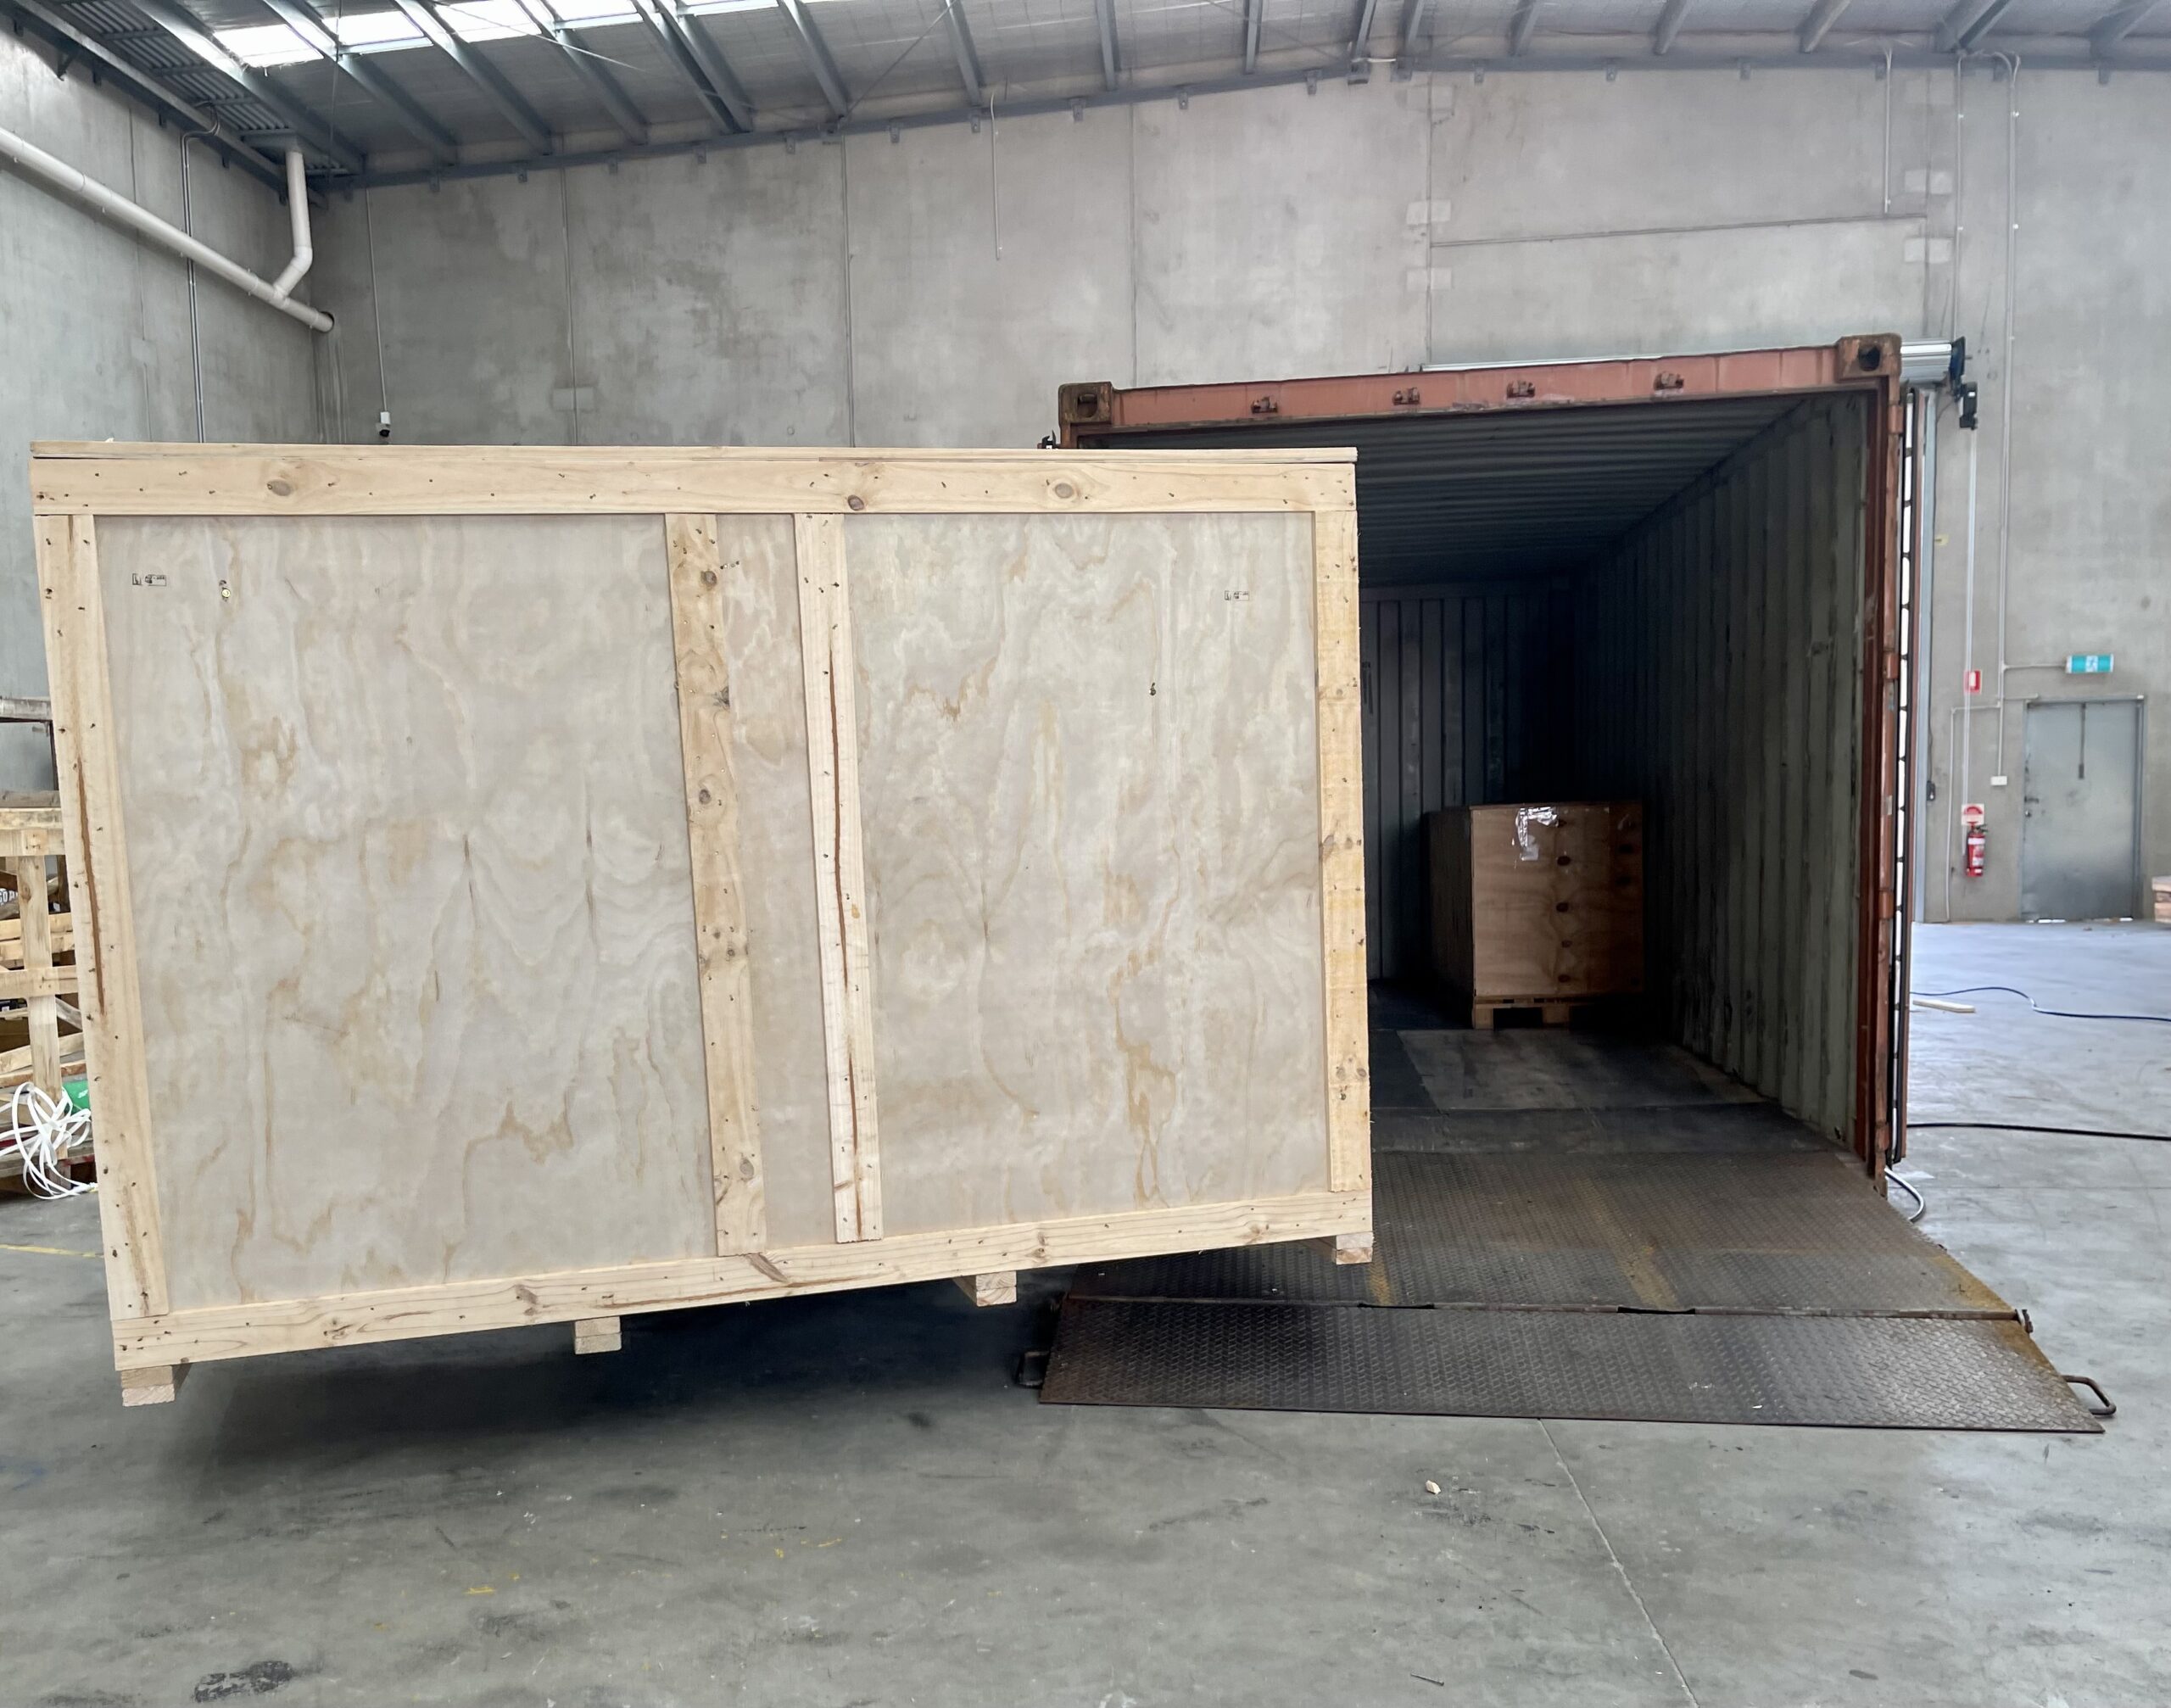 plywood box and shipping container with image of Crate n Pack Solutions logo in background.